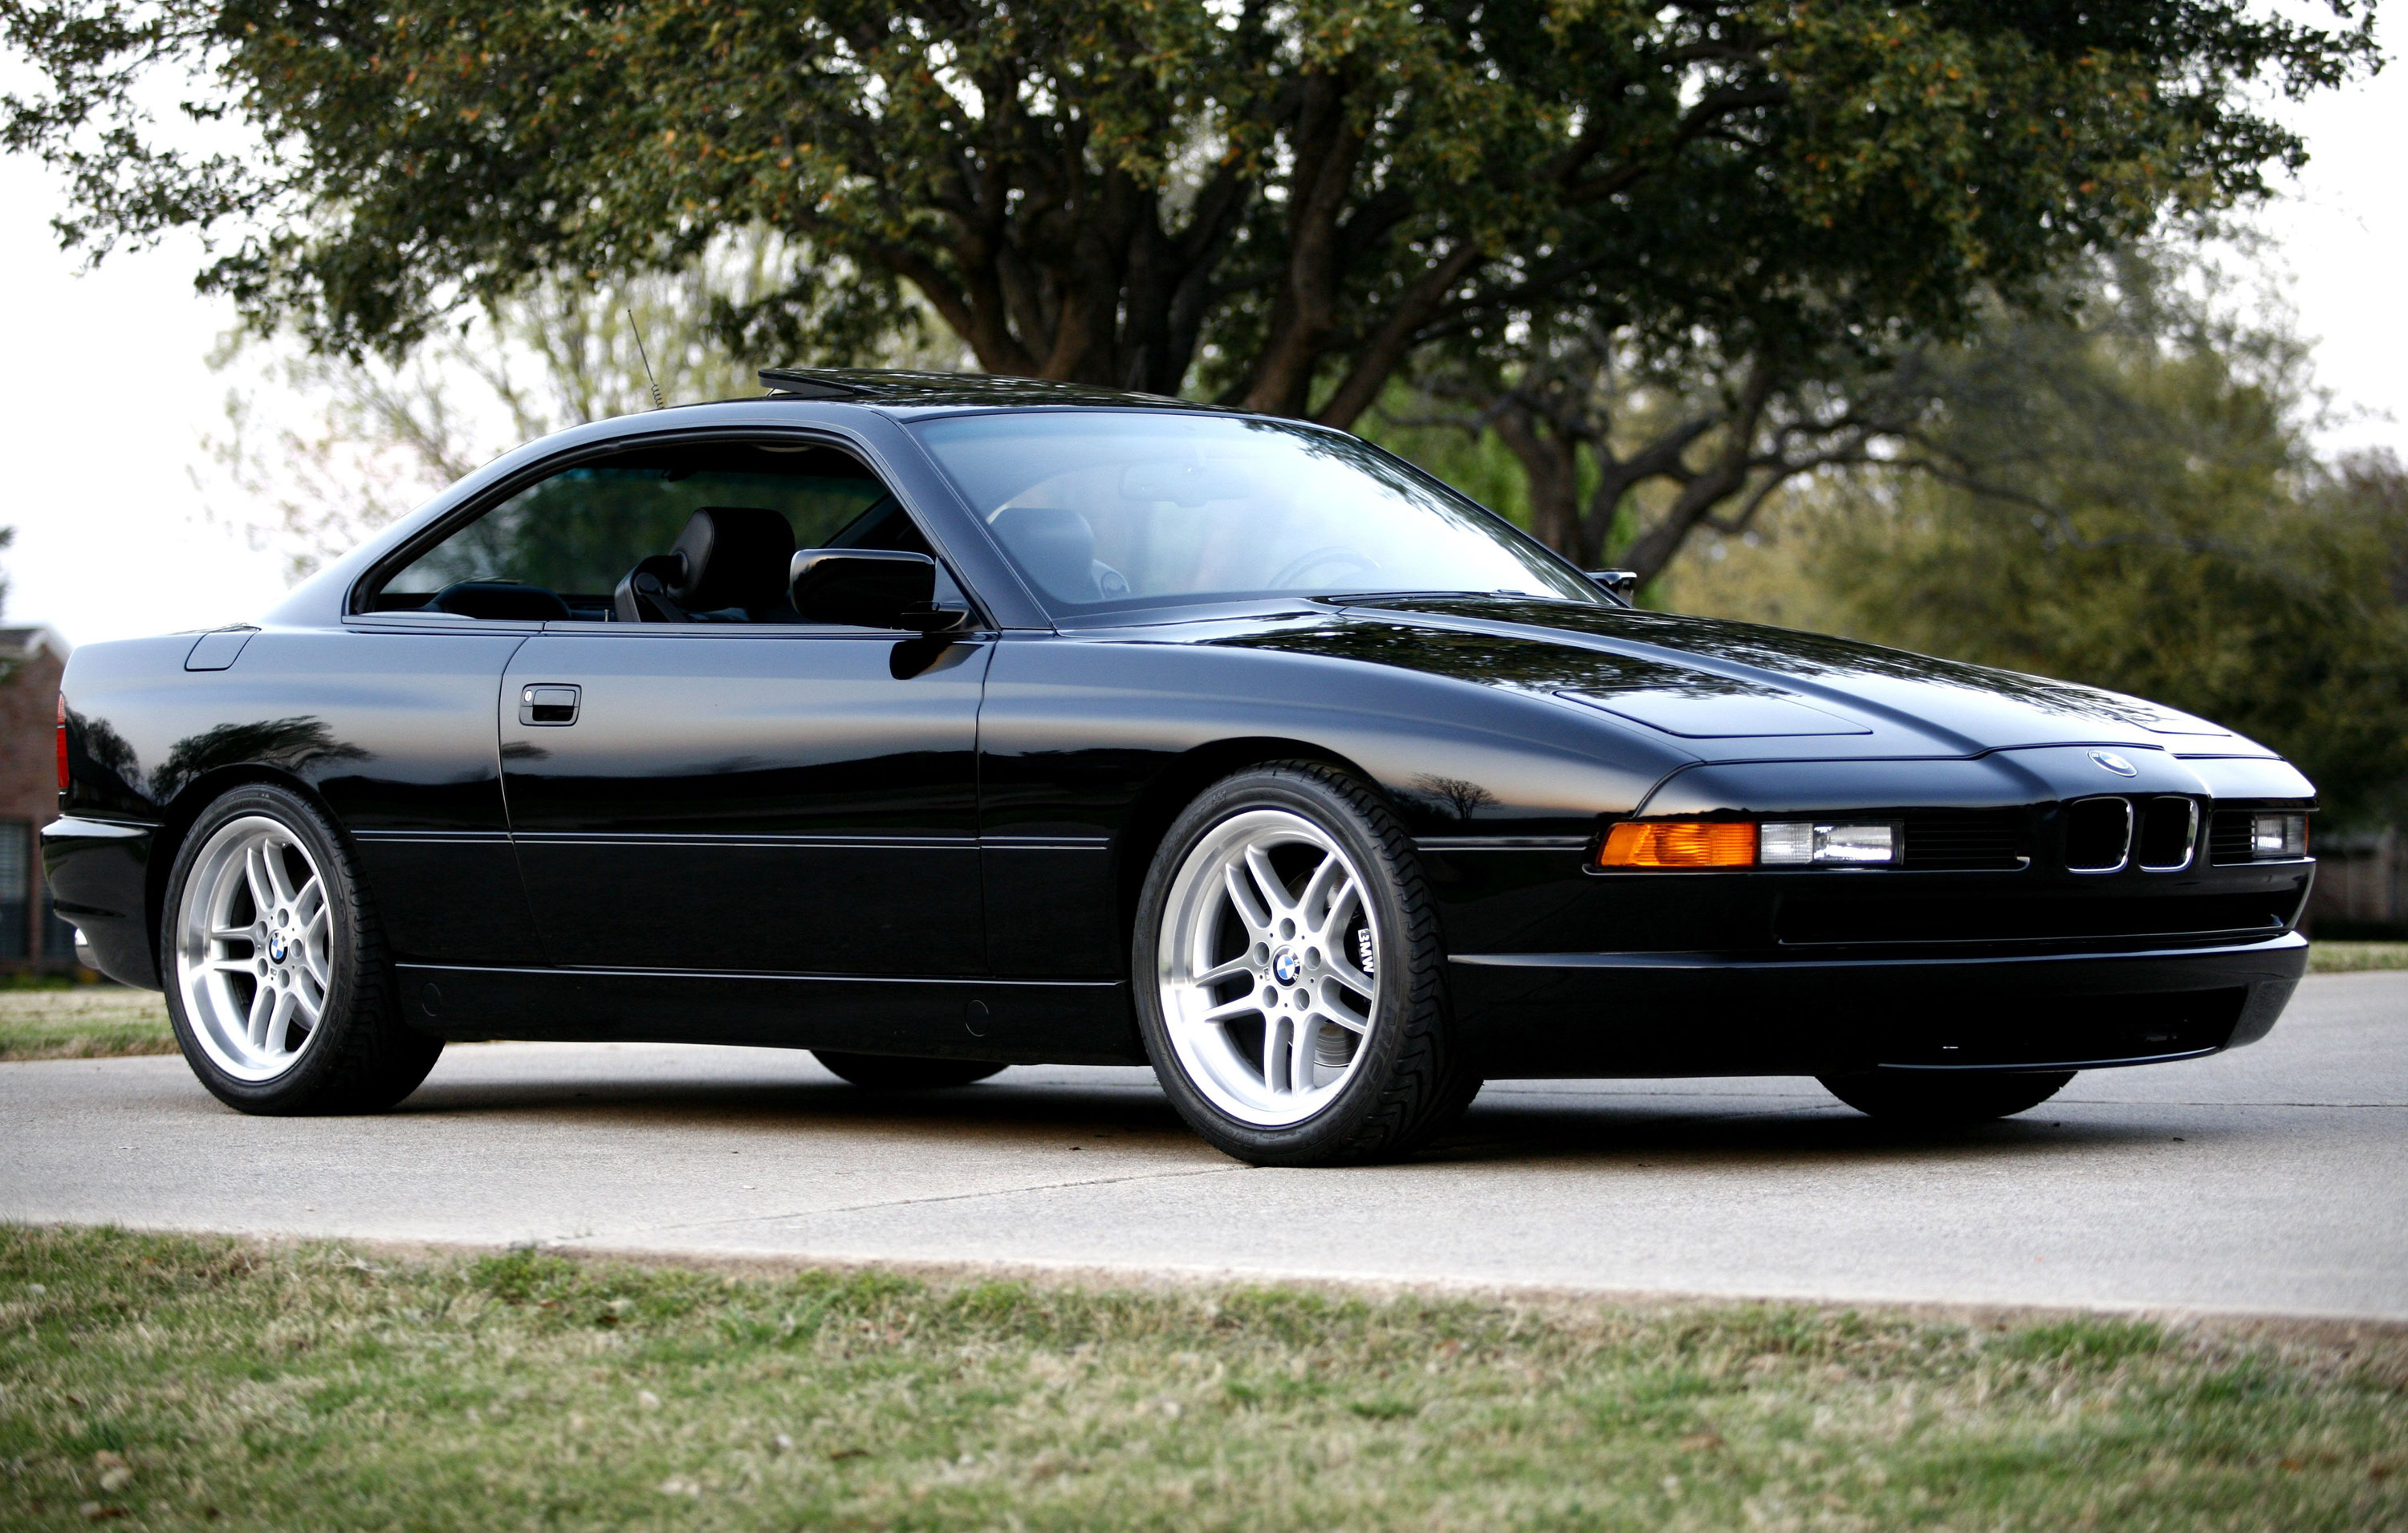 BMW 8-Series E31 - The Great Eight